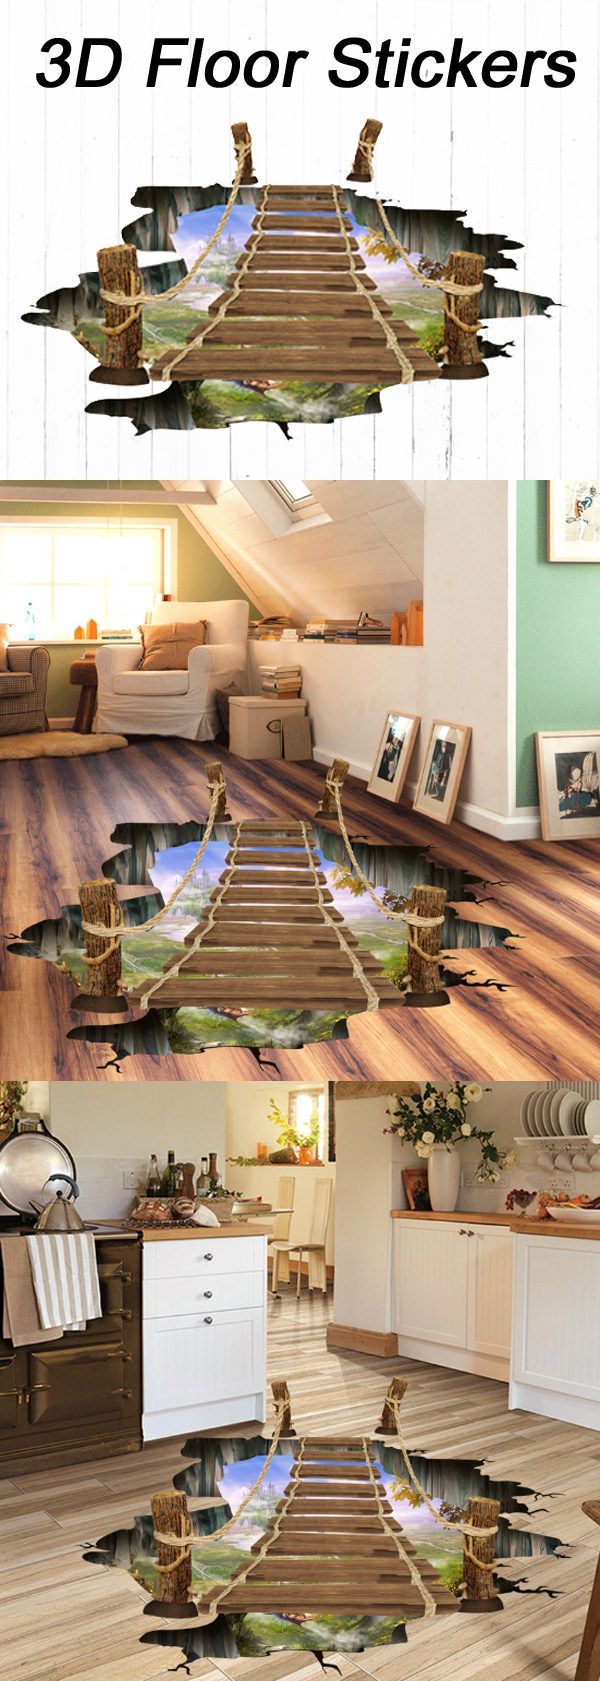 US$6.99 36% 3D Wooden Bridge Living Room Bedroom Animals Floor Home Background Wall Decor Creative Stickers Home Decor from Home and Garden on banggood.com -   20 game room decor
 ideas